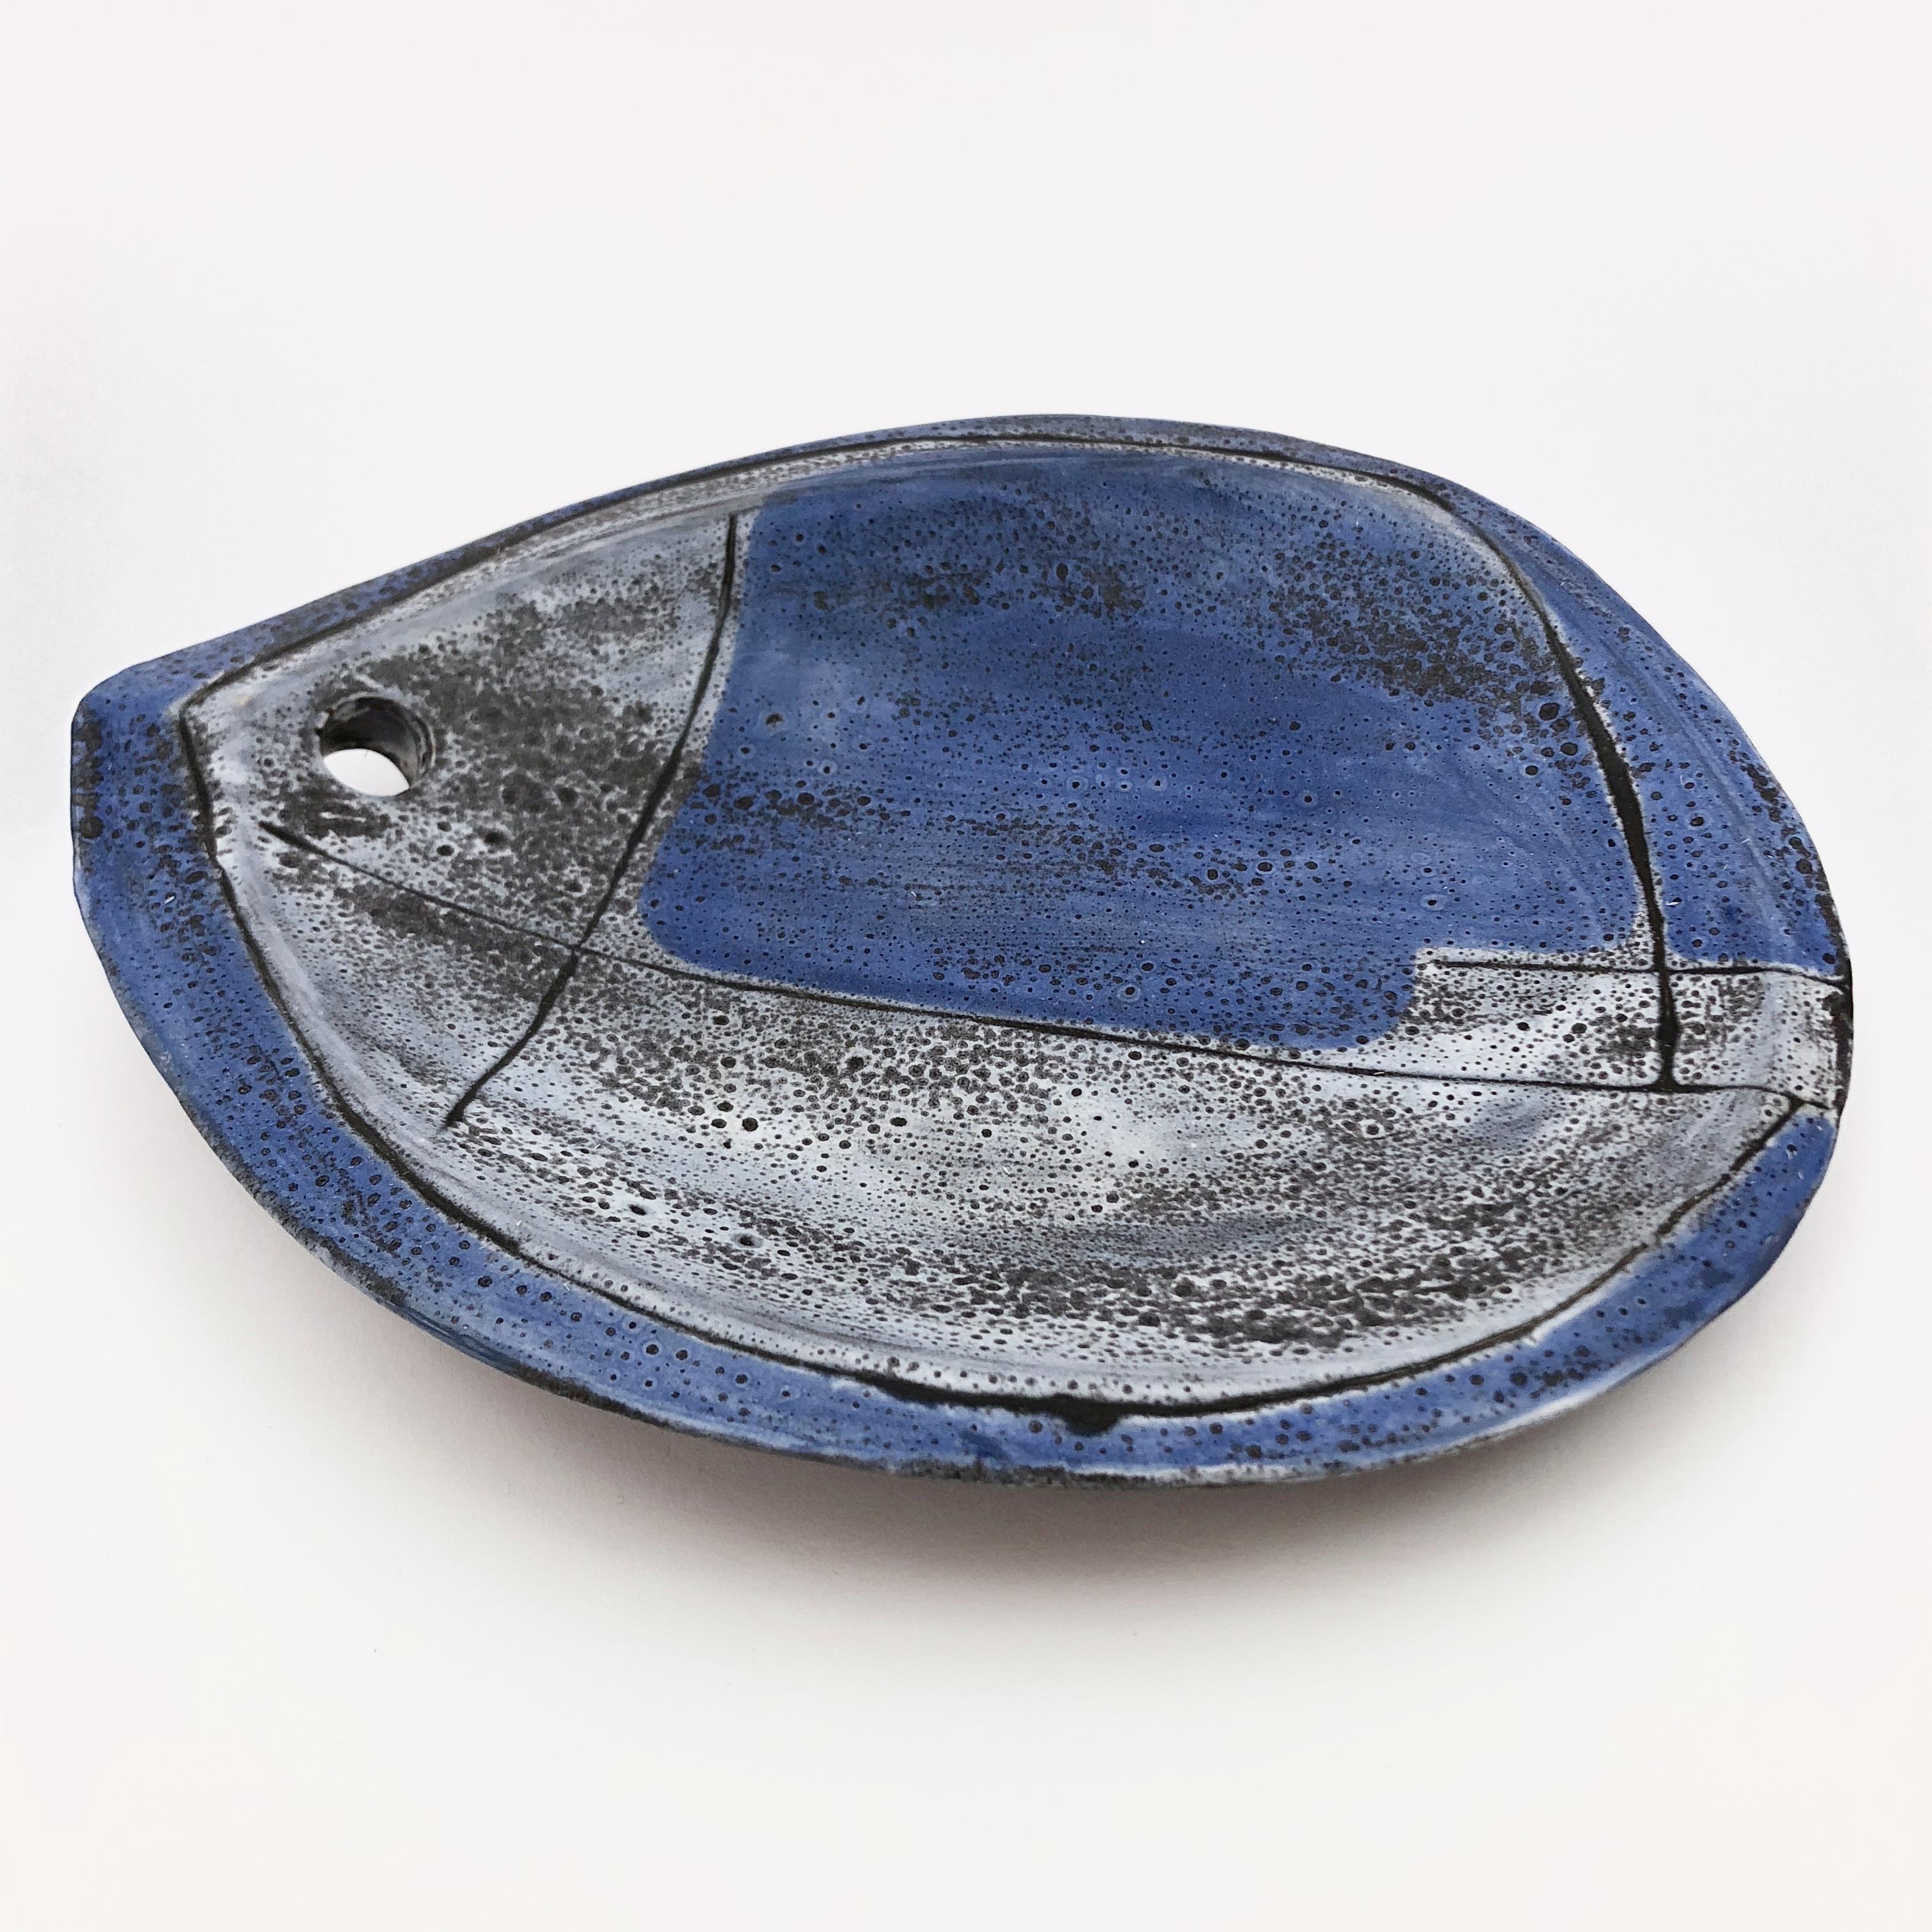 Rare decorative bowl or vide-poche, stylized fish shaped, ceramic glazed in shades of 
of mottled blue and grey-blue.
The piece is pierced and could also be hung as a wall decoration. 
Vide poche signed back with the French ceramicist's initials